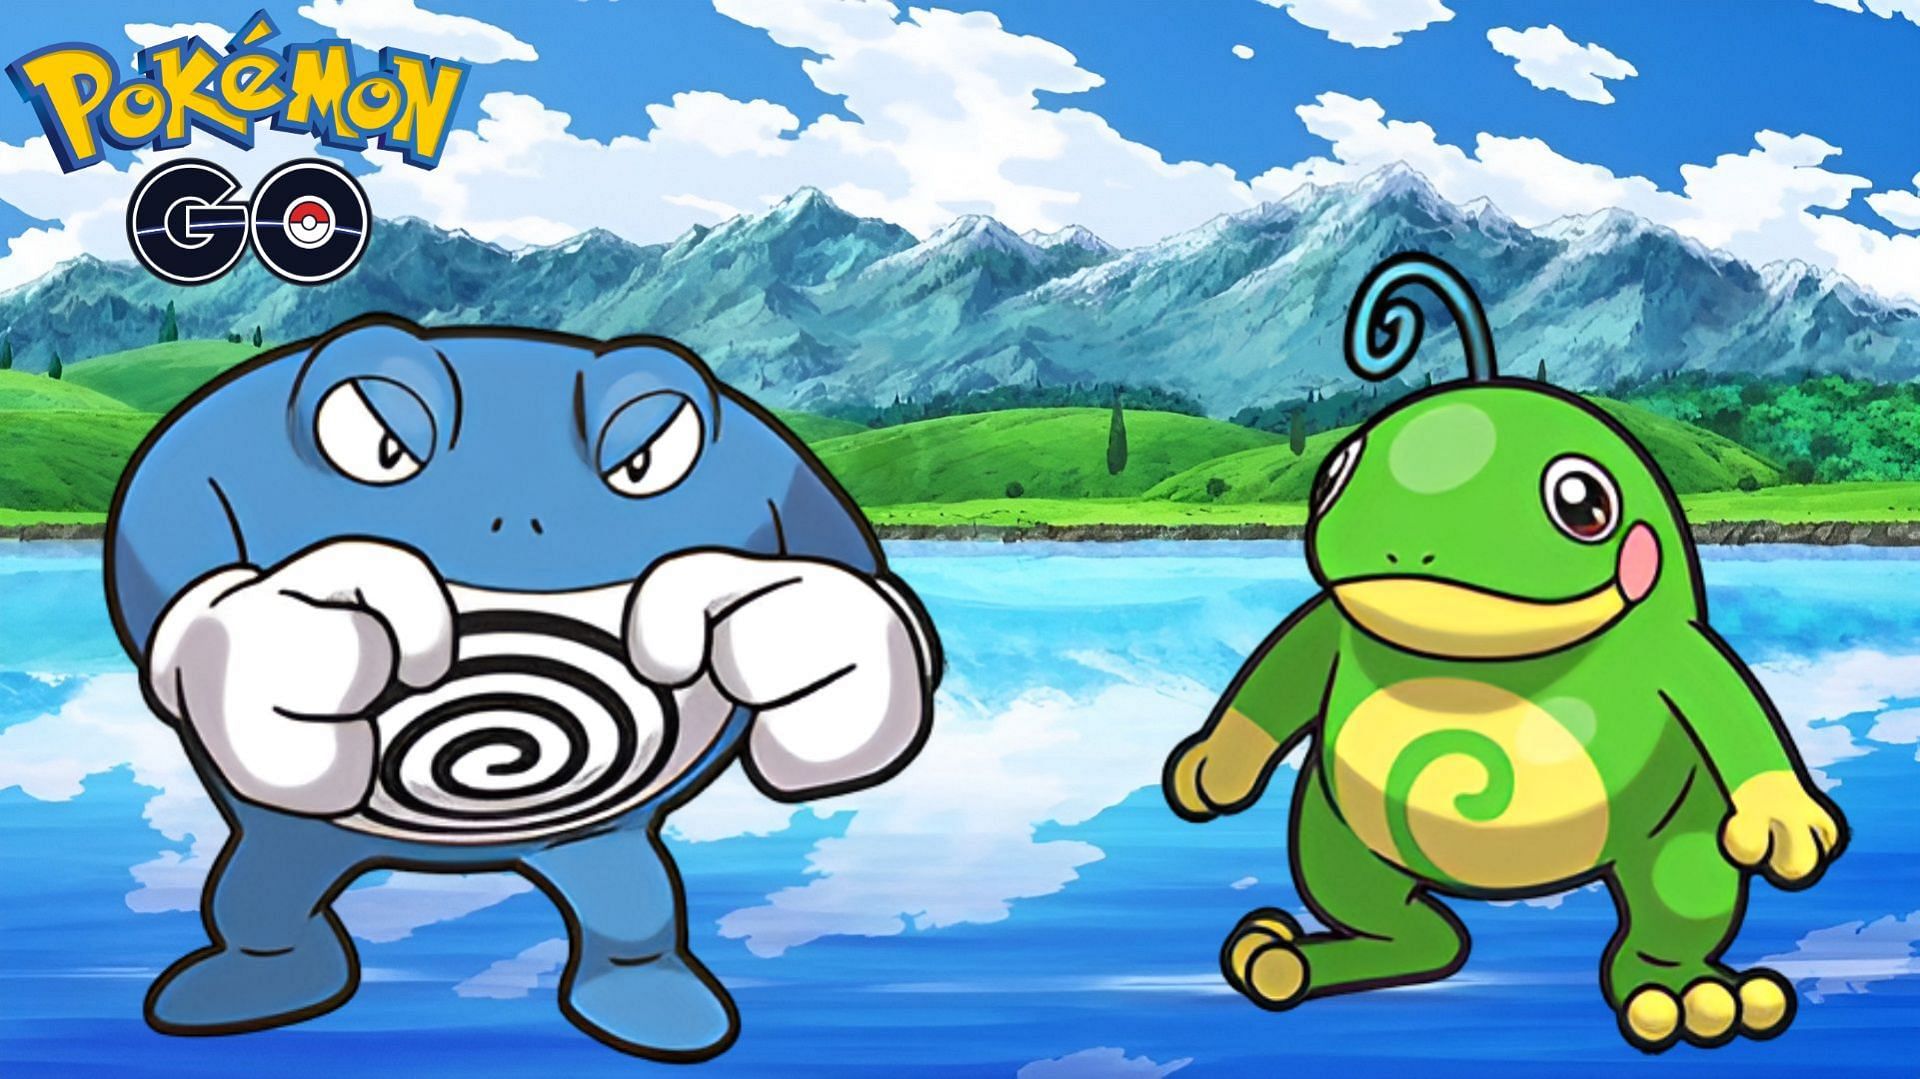 Poliwrath vs Politoed: Which is better in Pokemon GO?